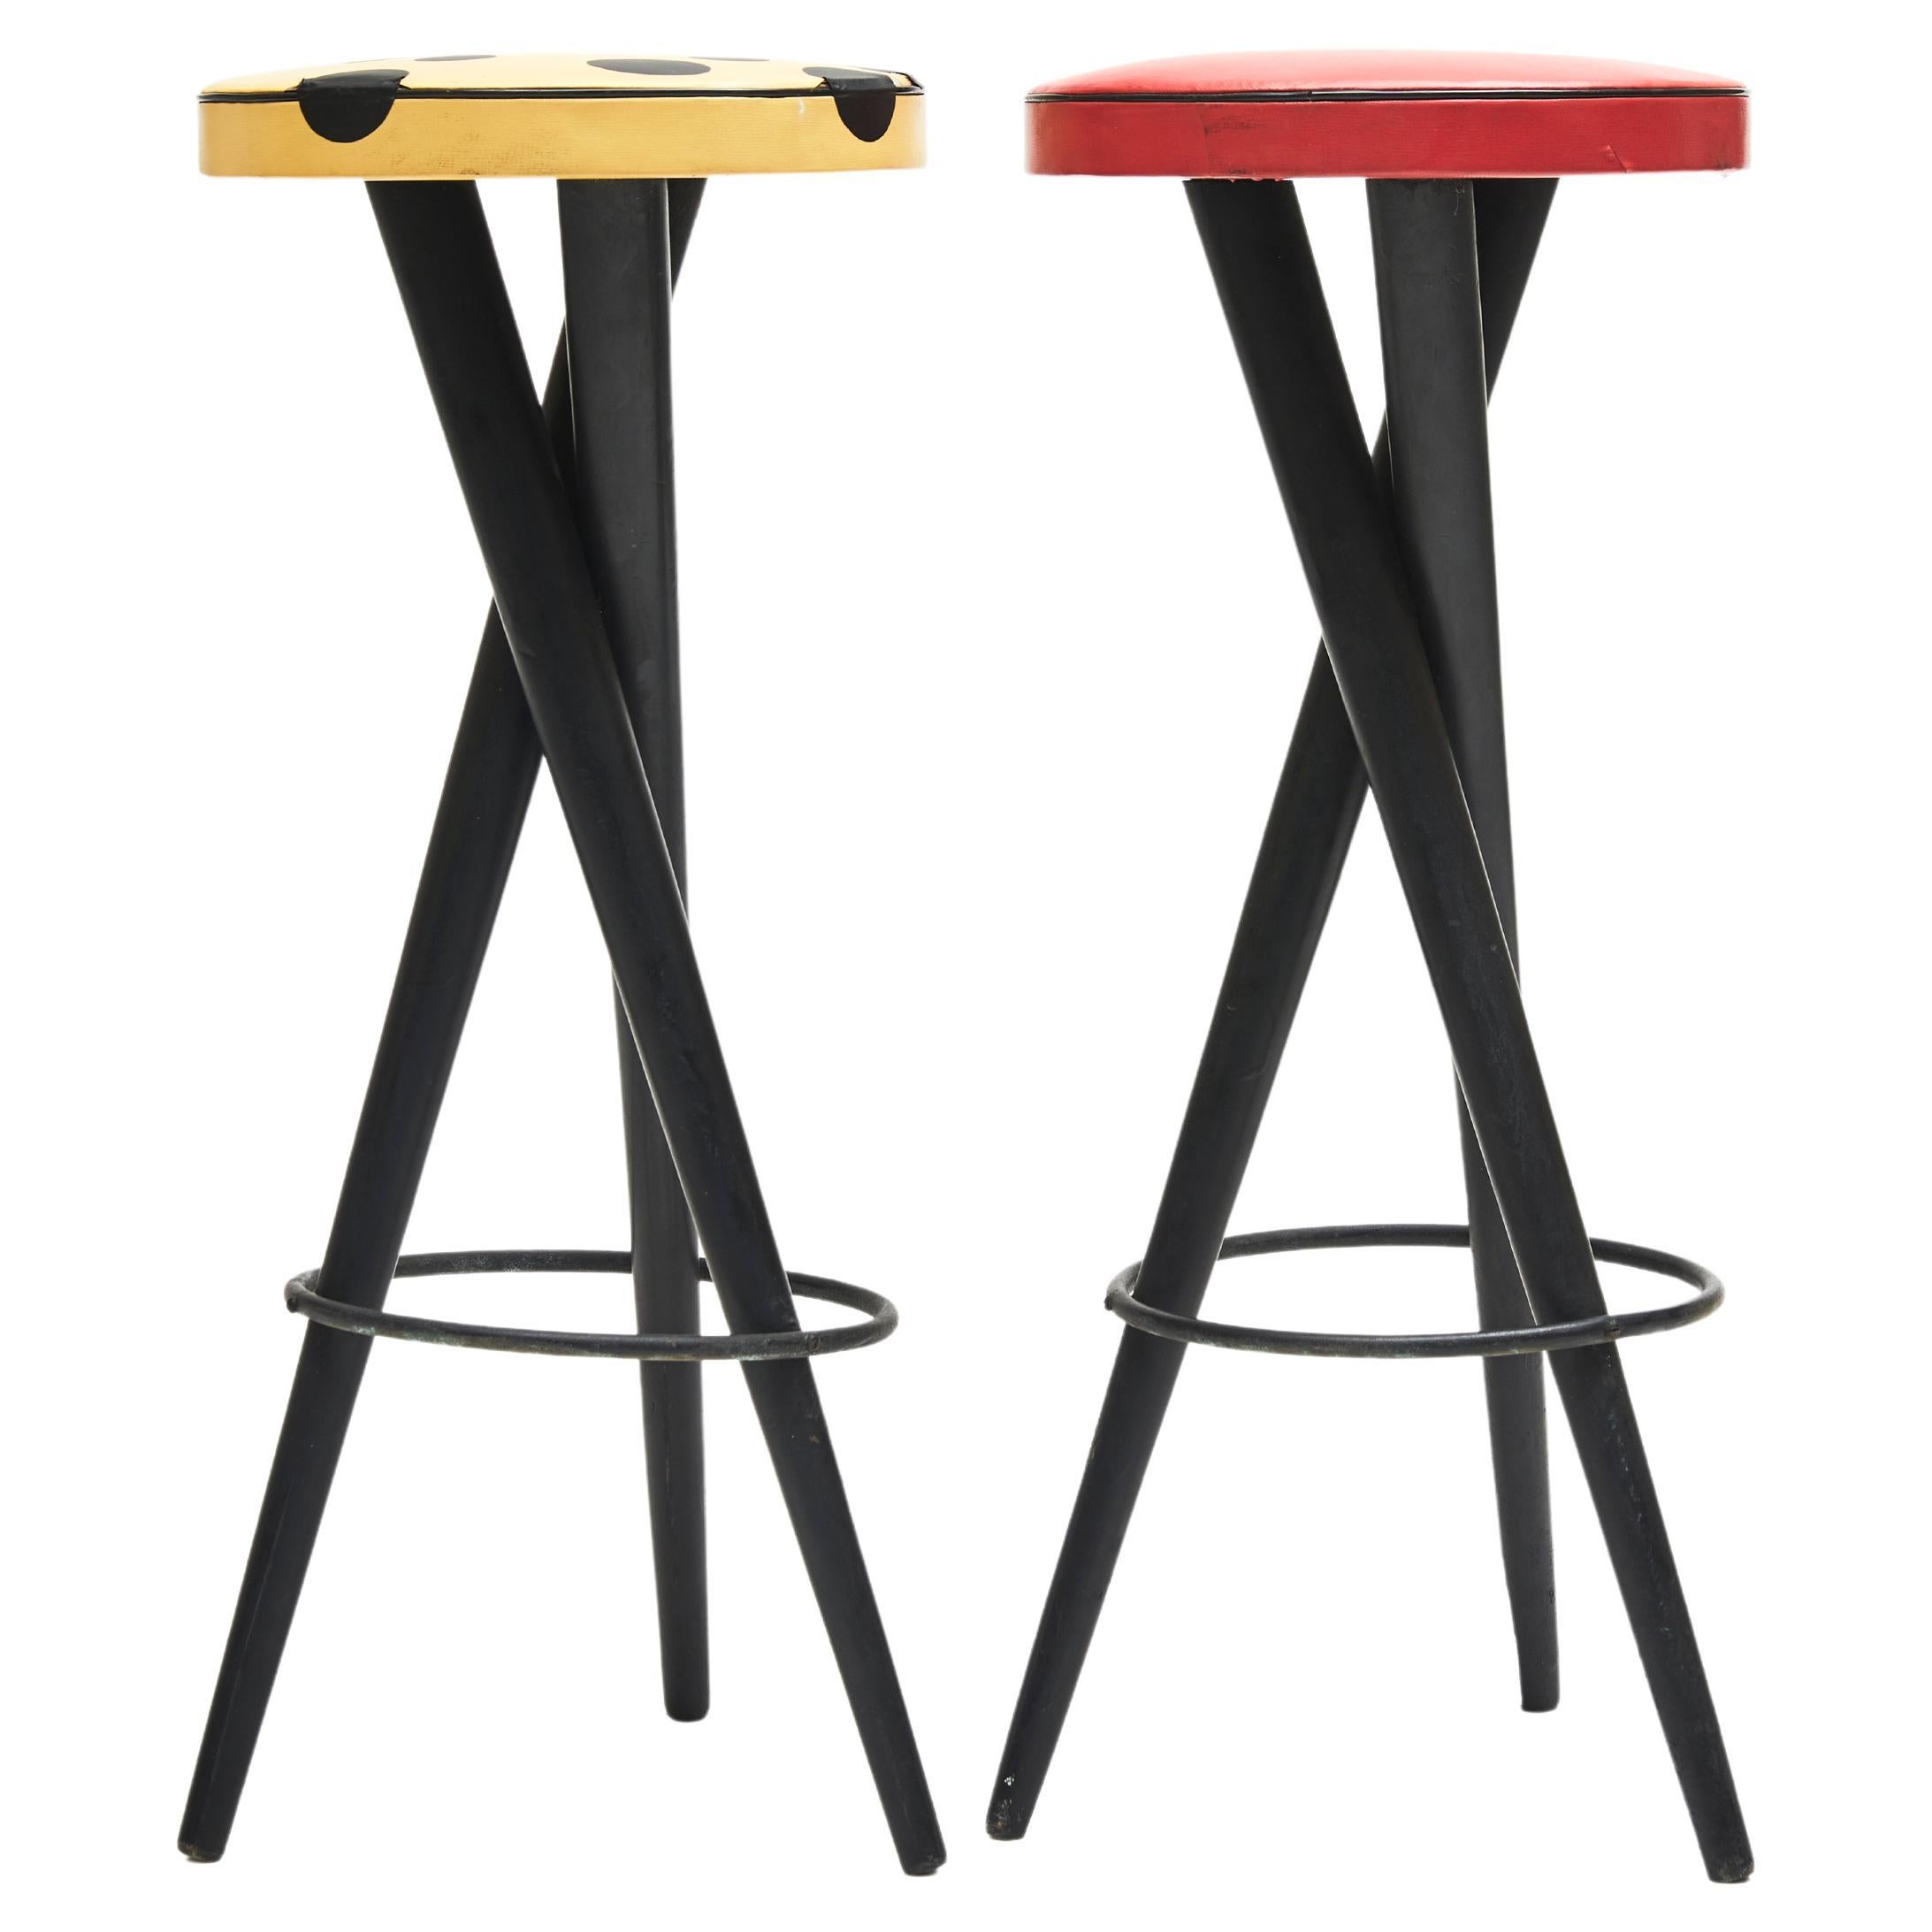 Brazilian Modern Bar Stools in Hardwood & Red & Yellow Leather S, Brazil, 1950s For Sale